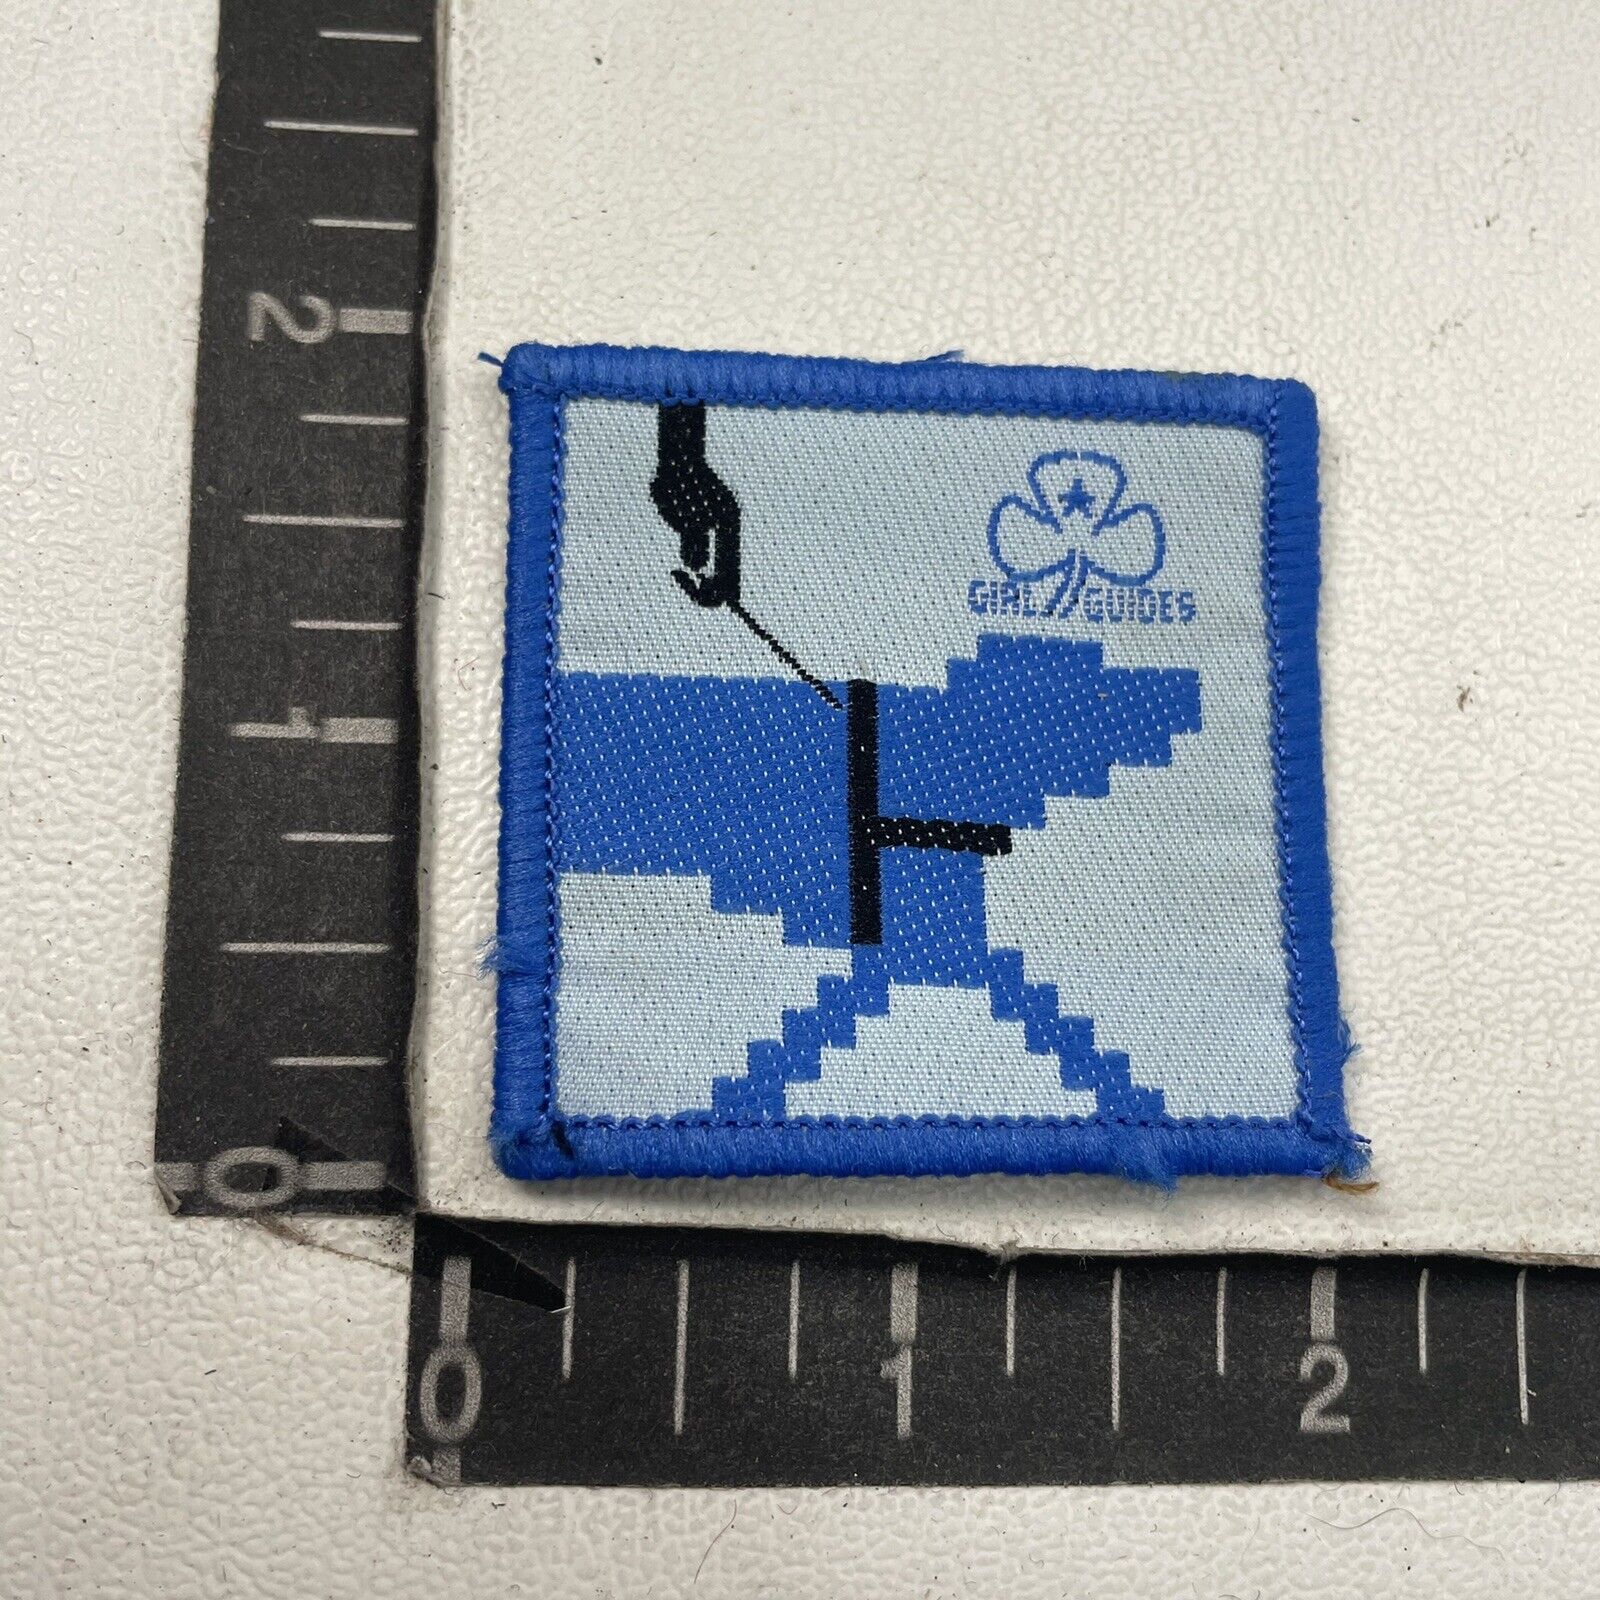 Vtg Girl Guides (Girl Scouts) Pixelated Blue Dog Patch C147